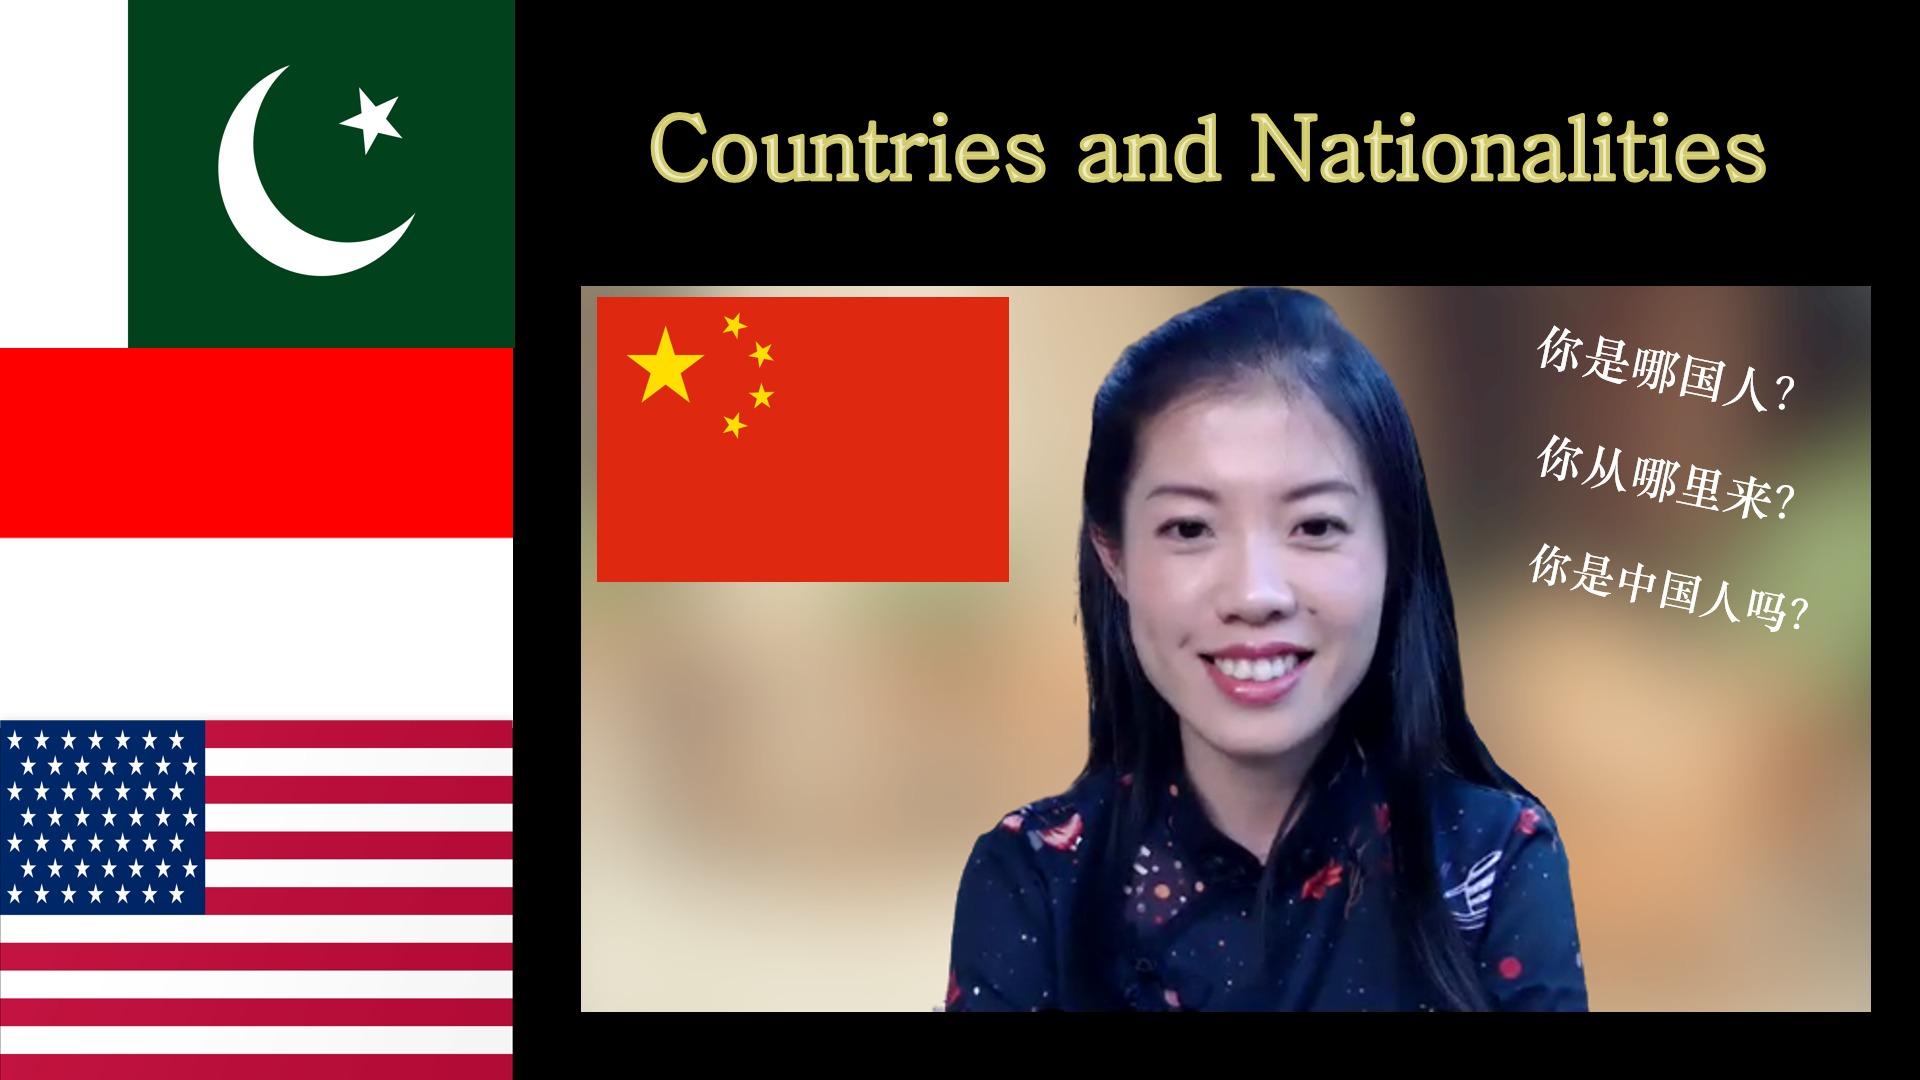 Learn to Say Countries and Nationalities in Chinese